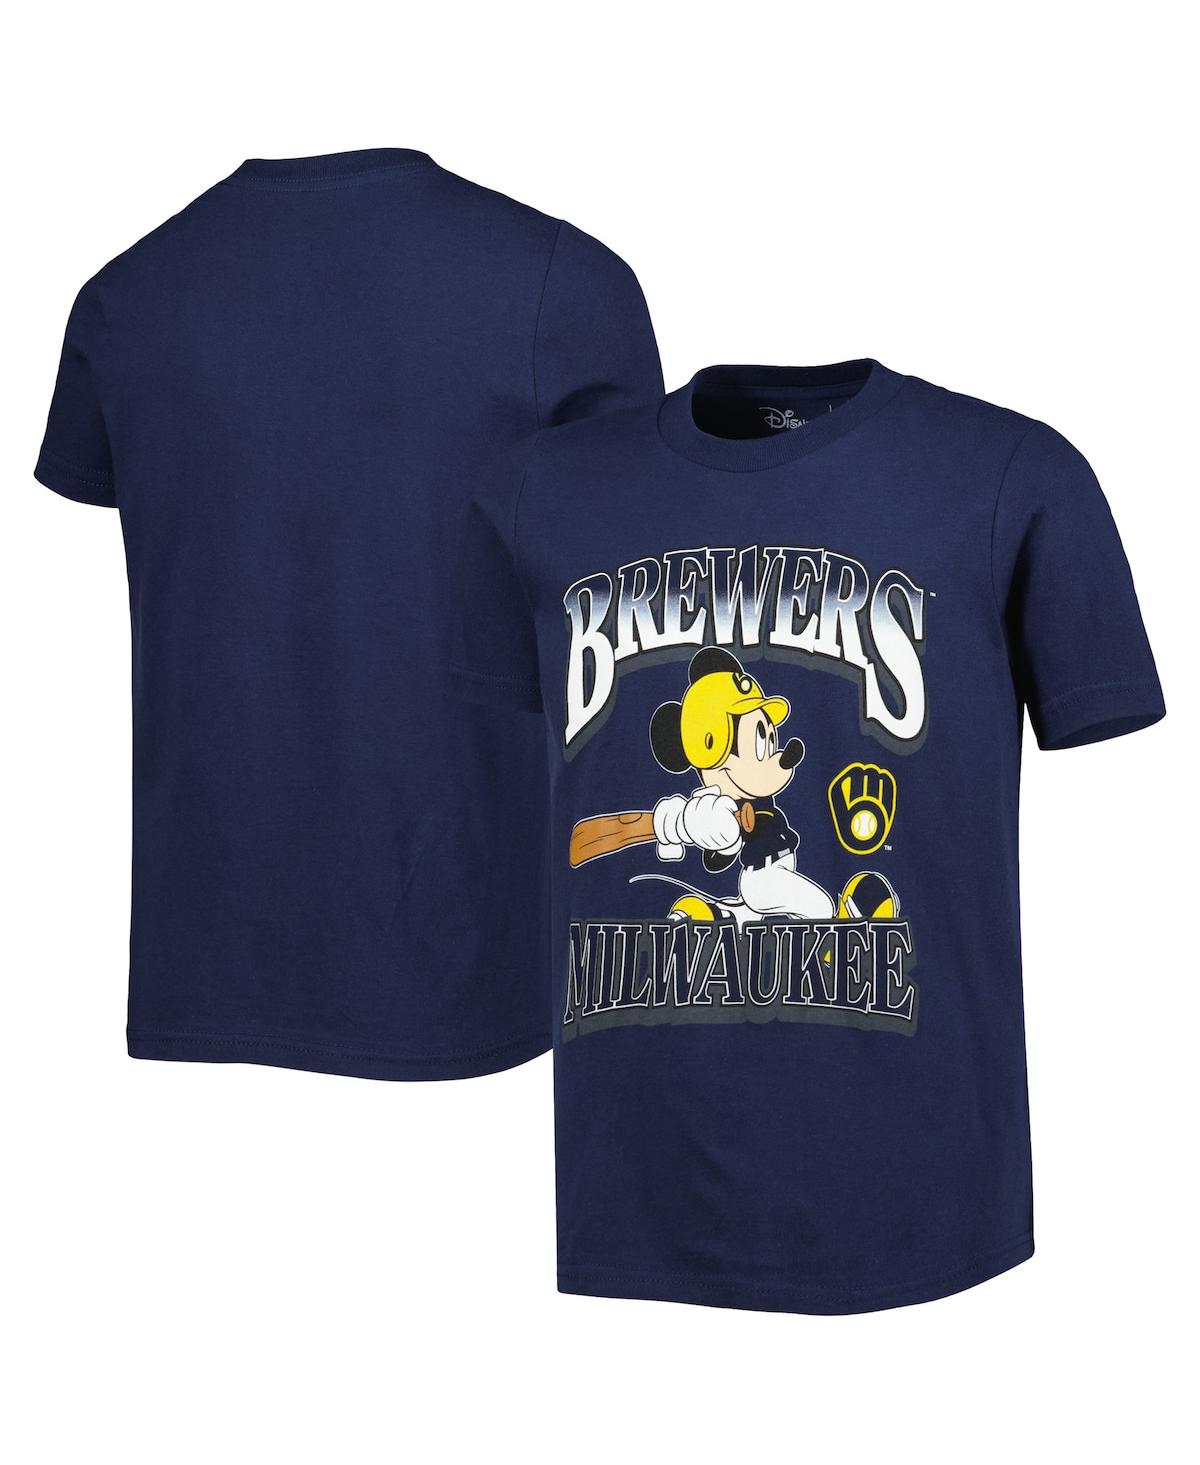 Outerstuff Kids' Big Boys And Girls Navy Milwaukee Brewers Disney Game Day T-shirt